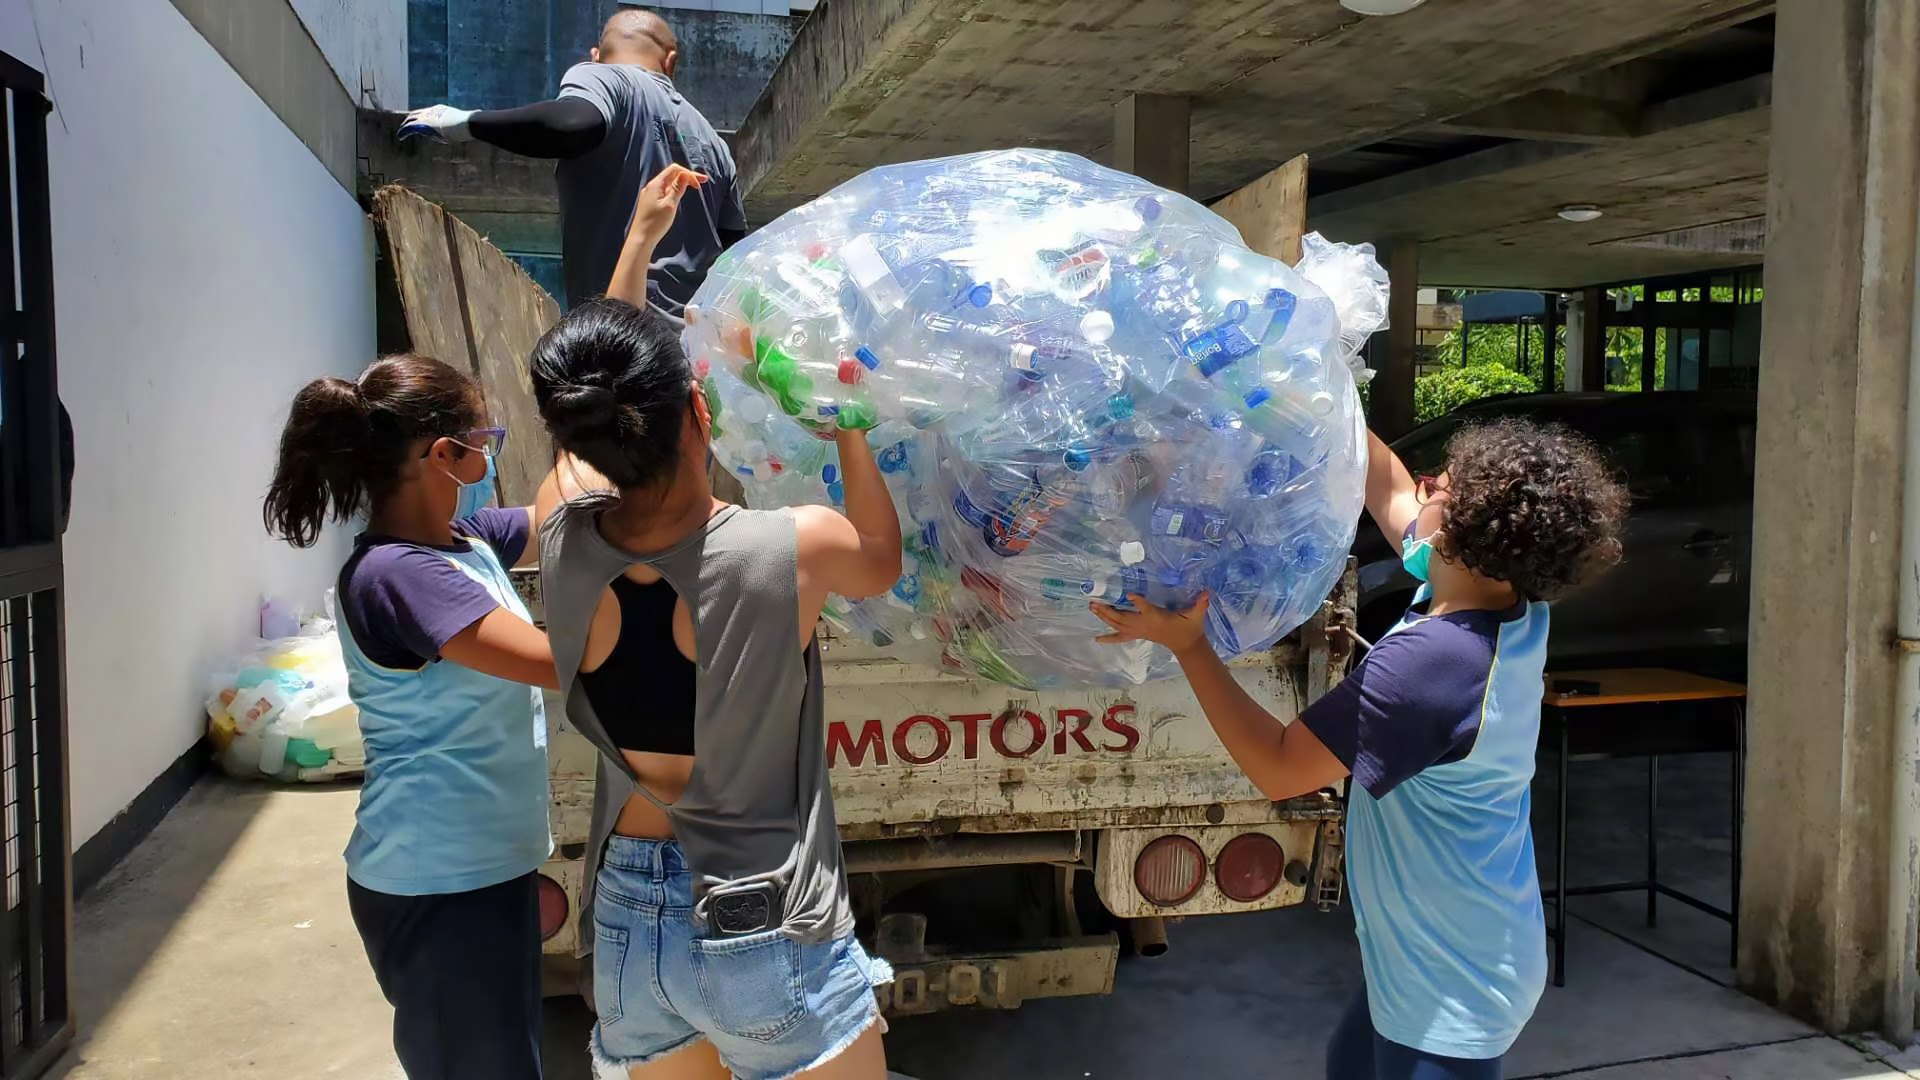 Macau for Waste Reduction - PET bottles are among the most common plastic materials that Macau for Waste Reduction collects at its events